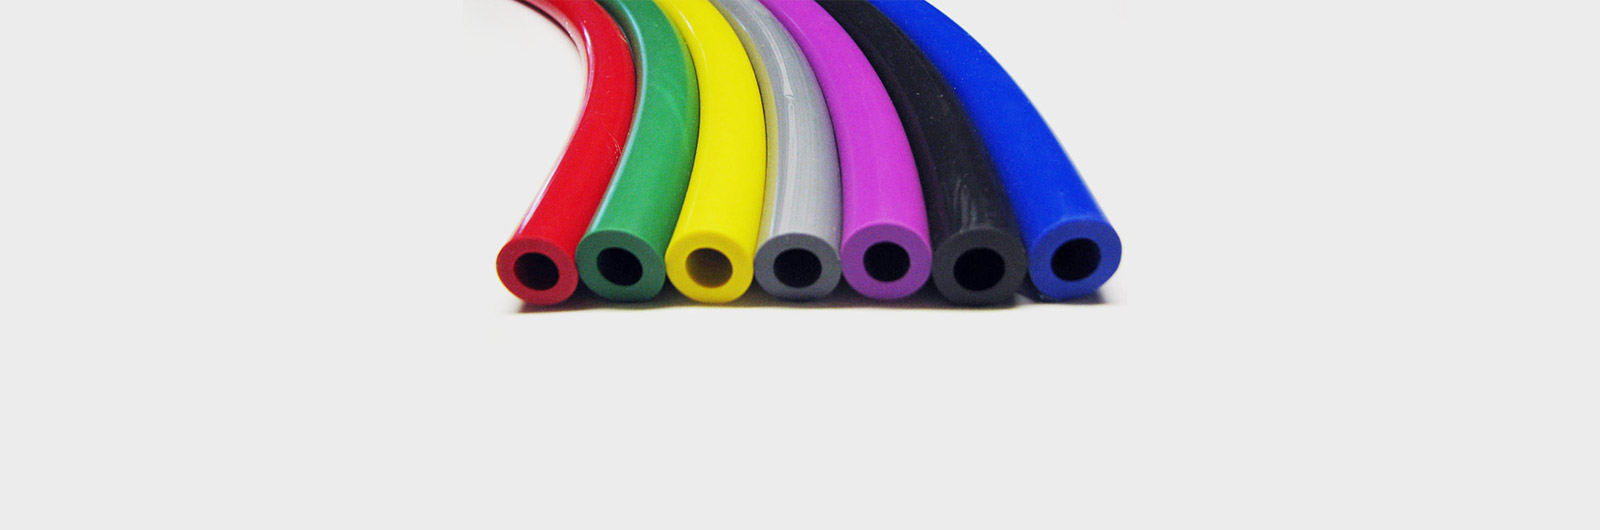 Pristine extruded hoses, cords and profiles